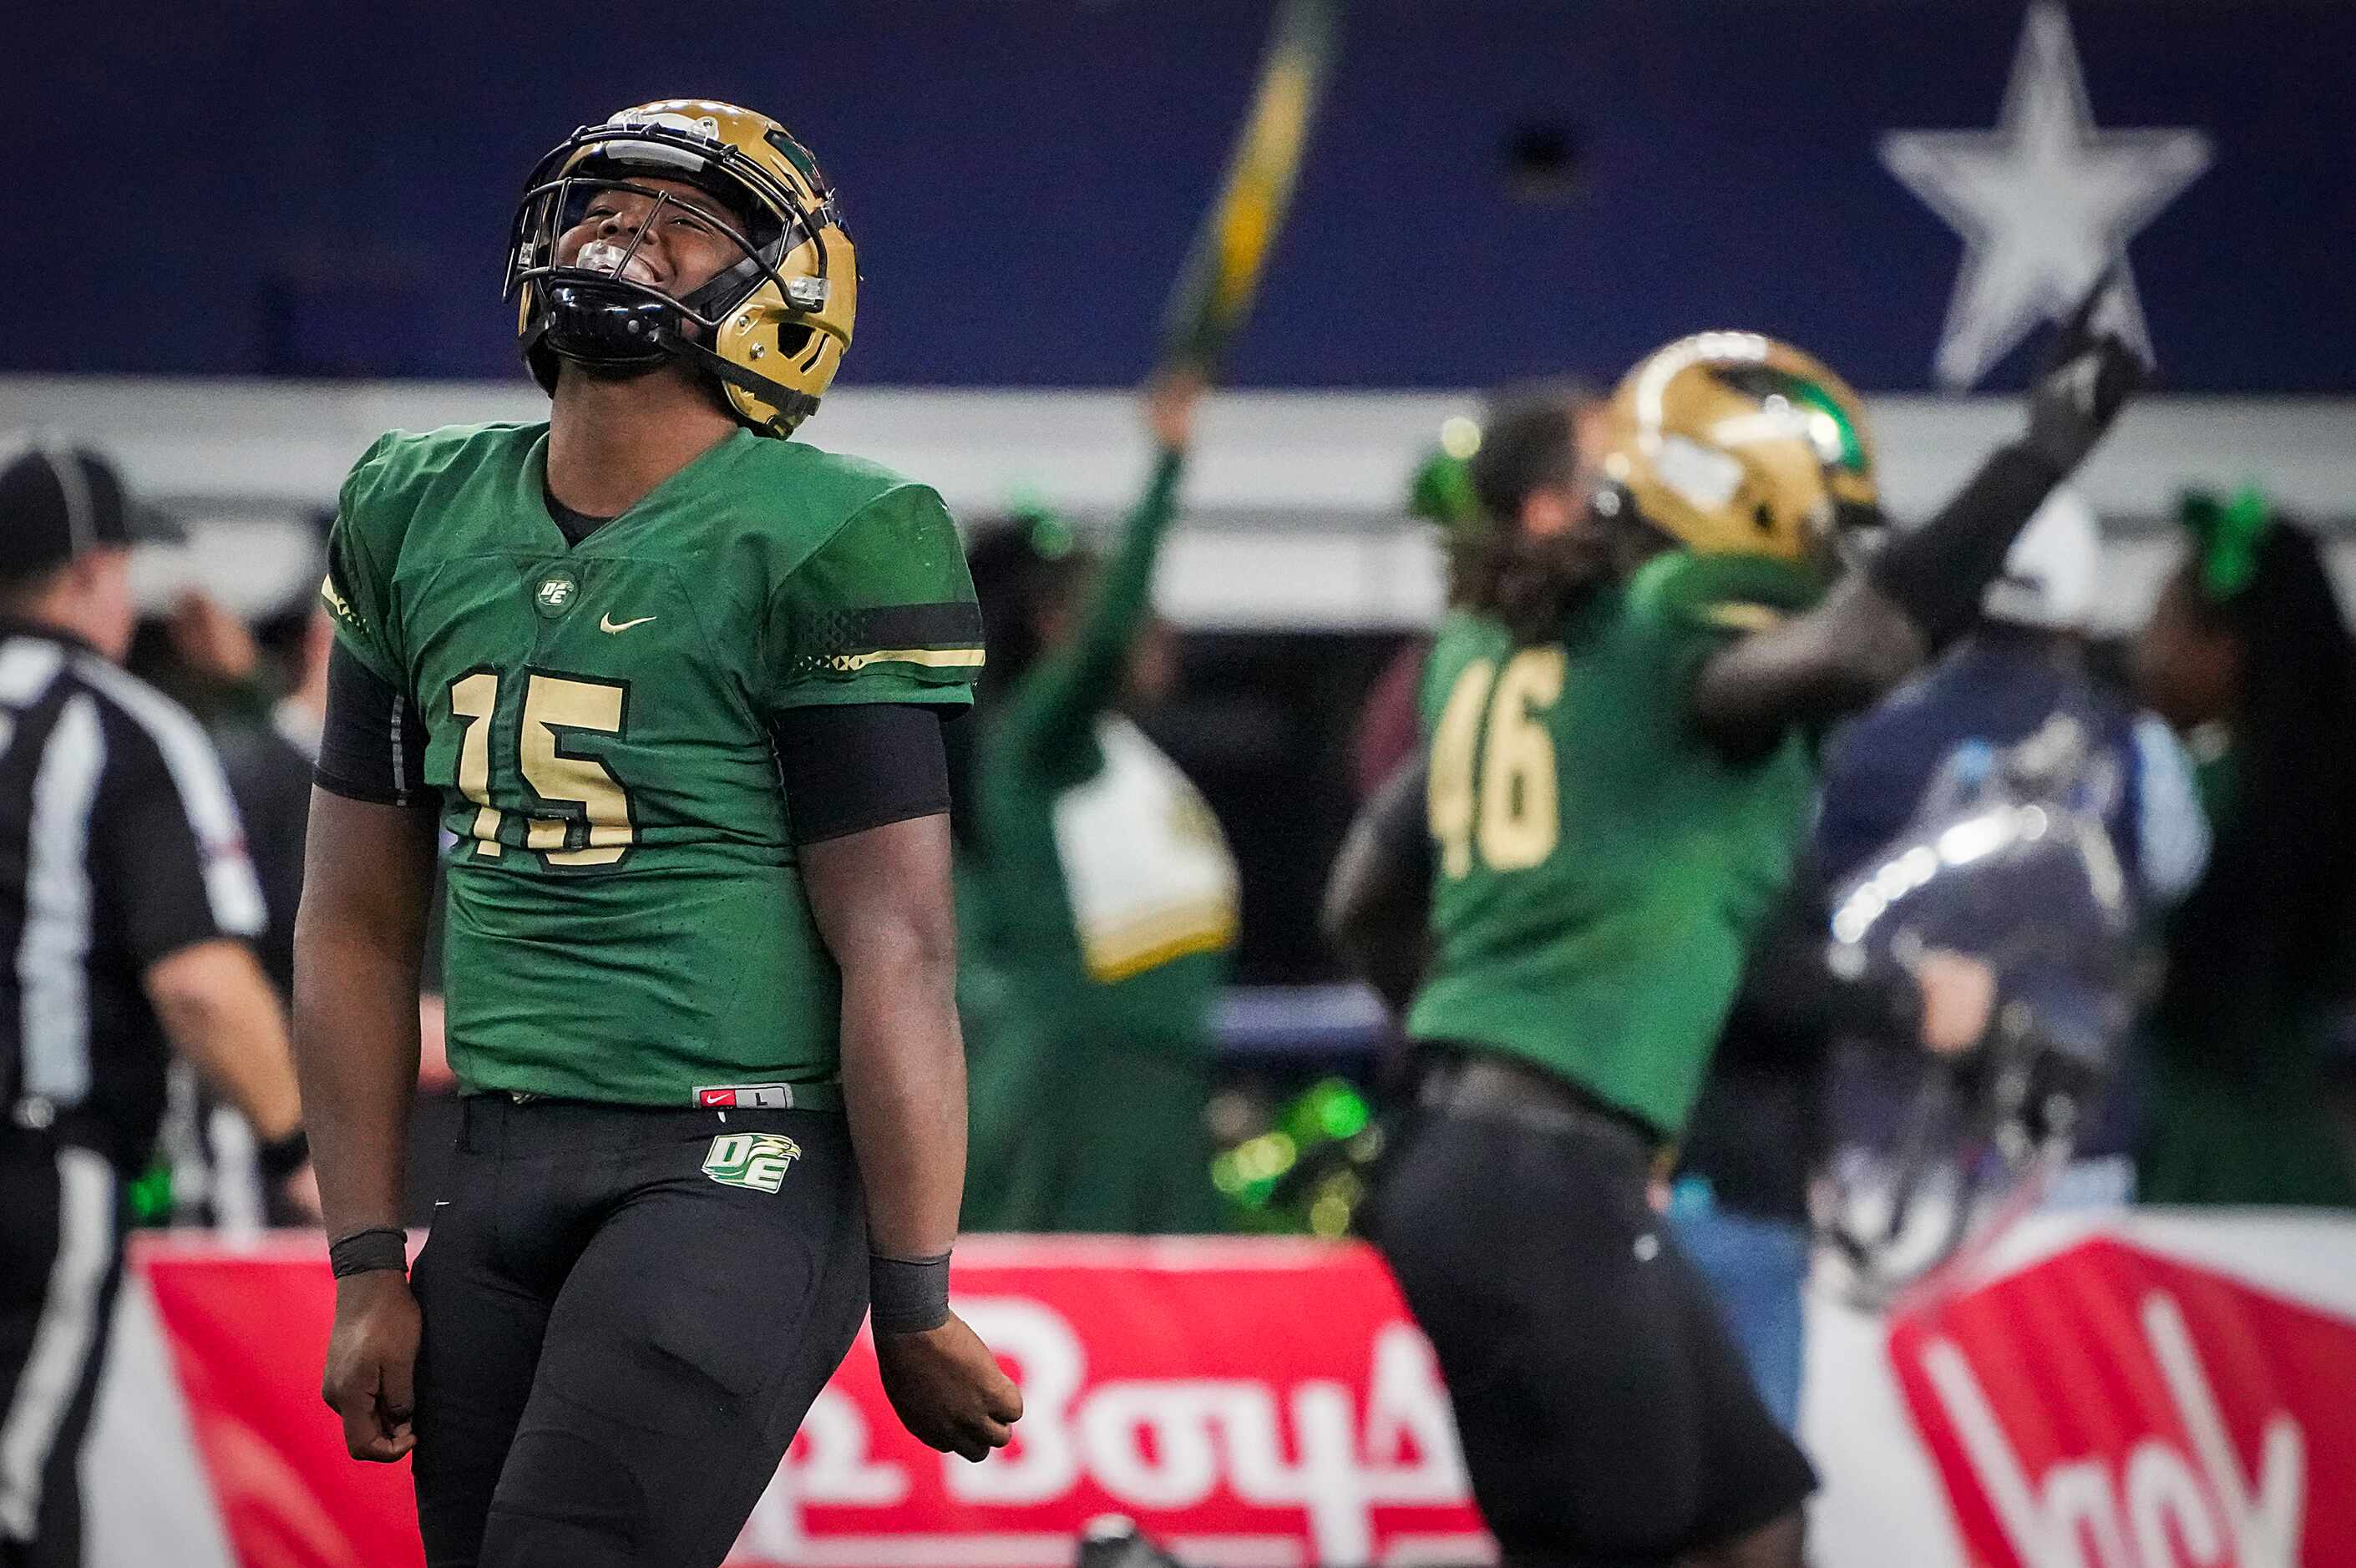 DeSoto quarterback Darius Bailey (15) celebrates after throwing a touchdown pass during the...